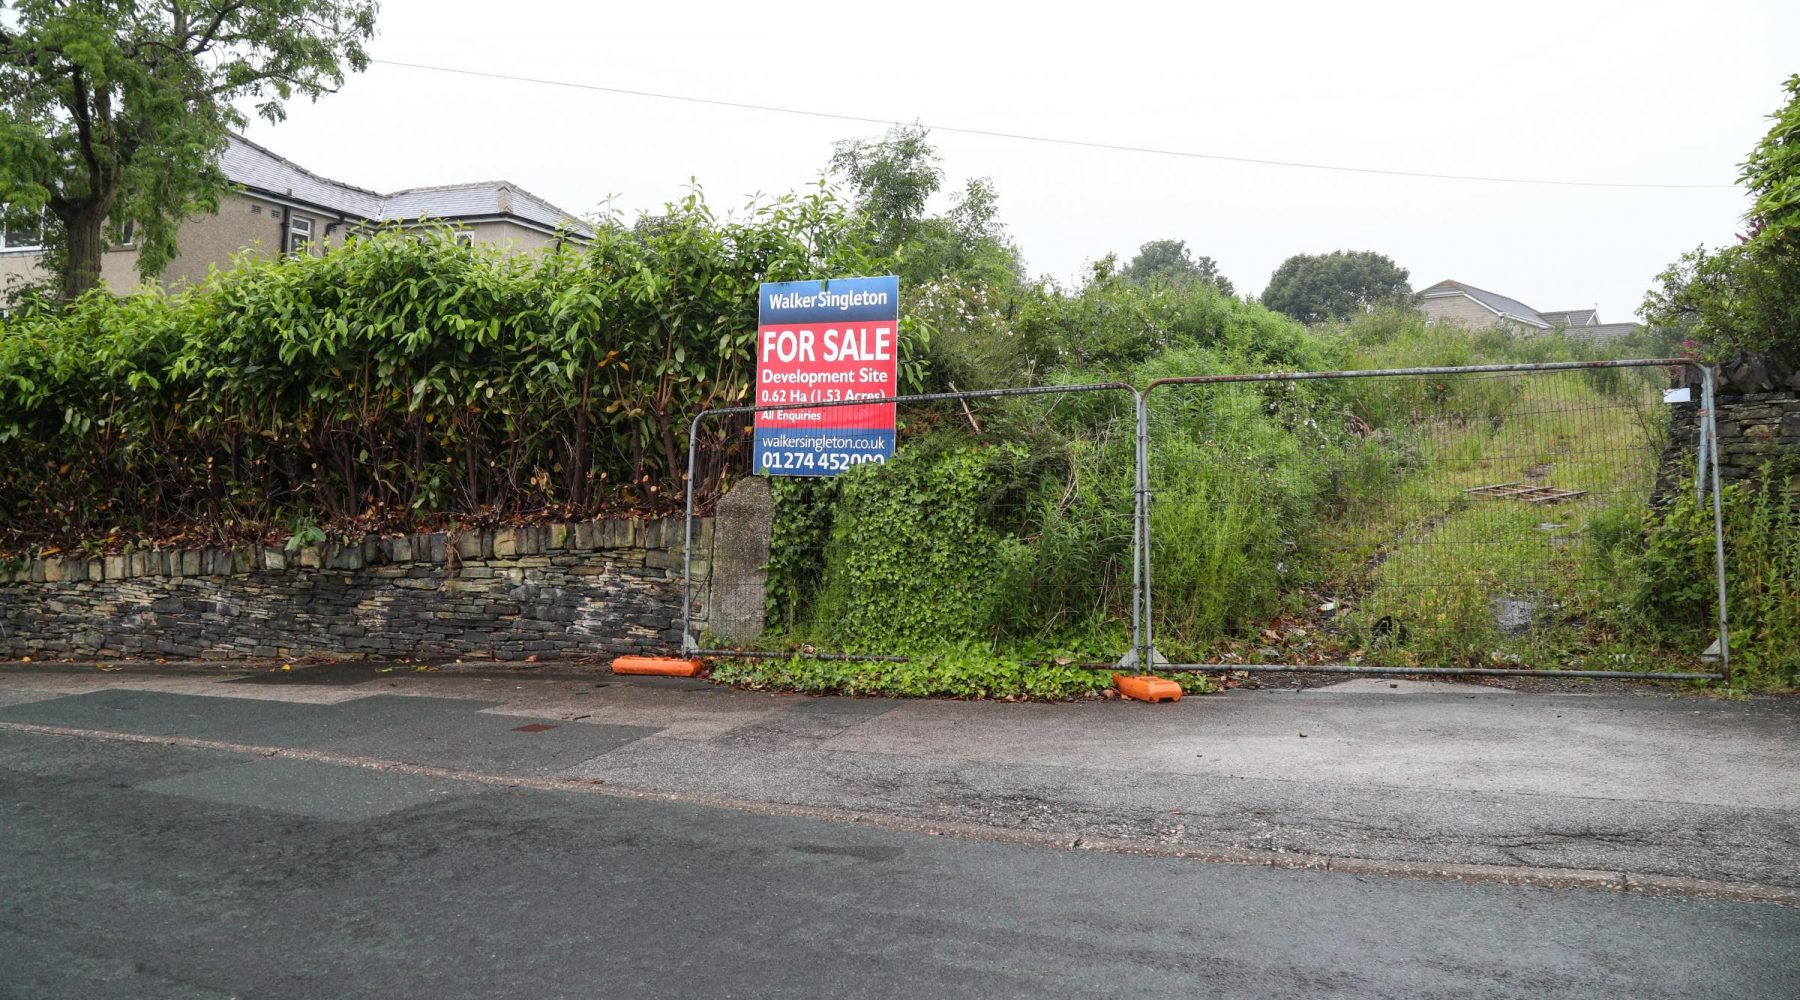 Developer tells Council it is 'not viable' to…